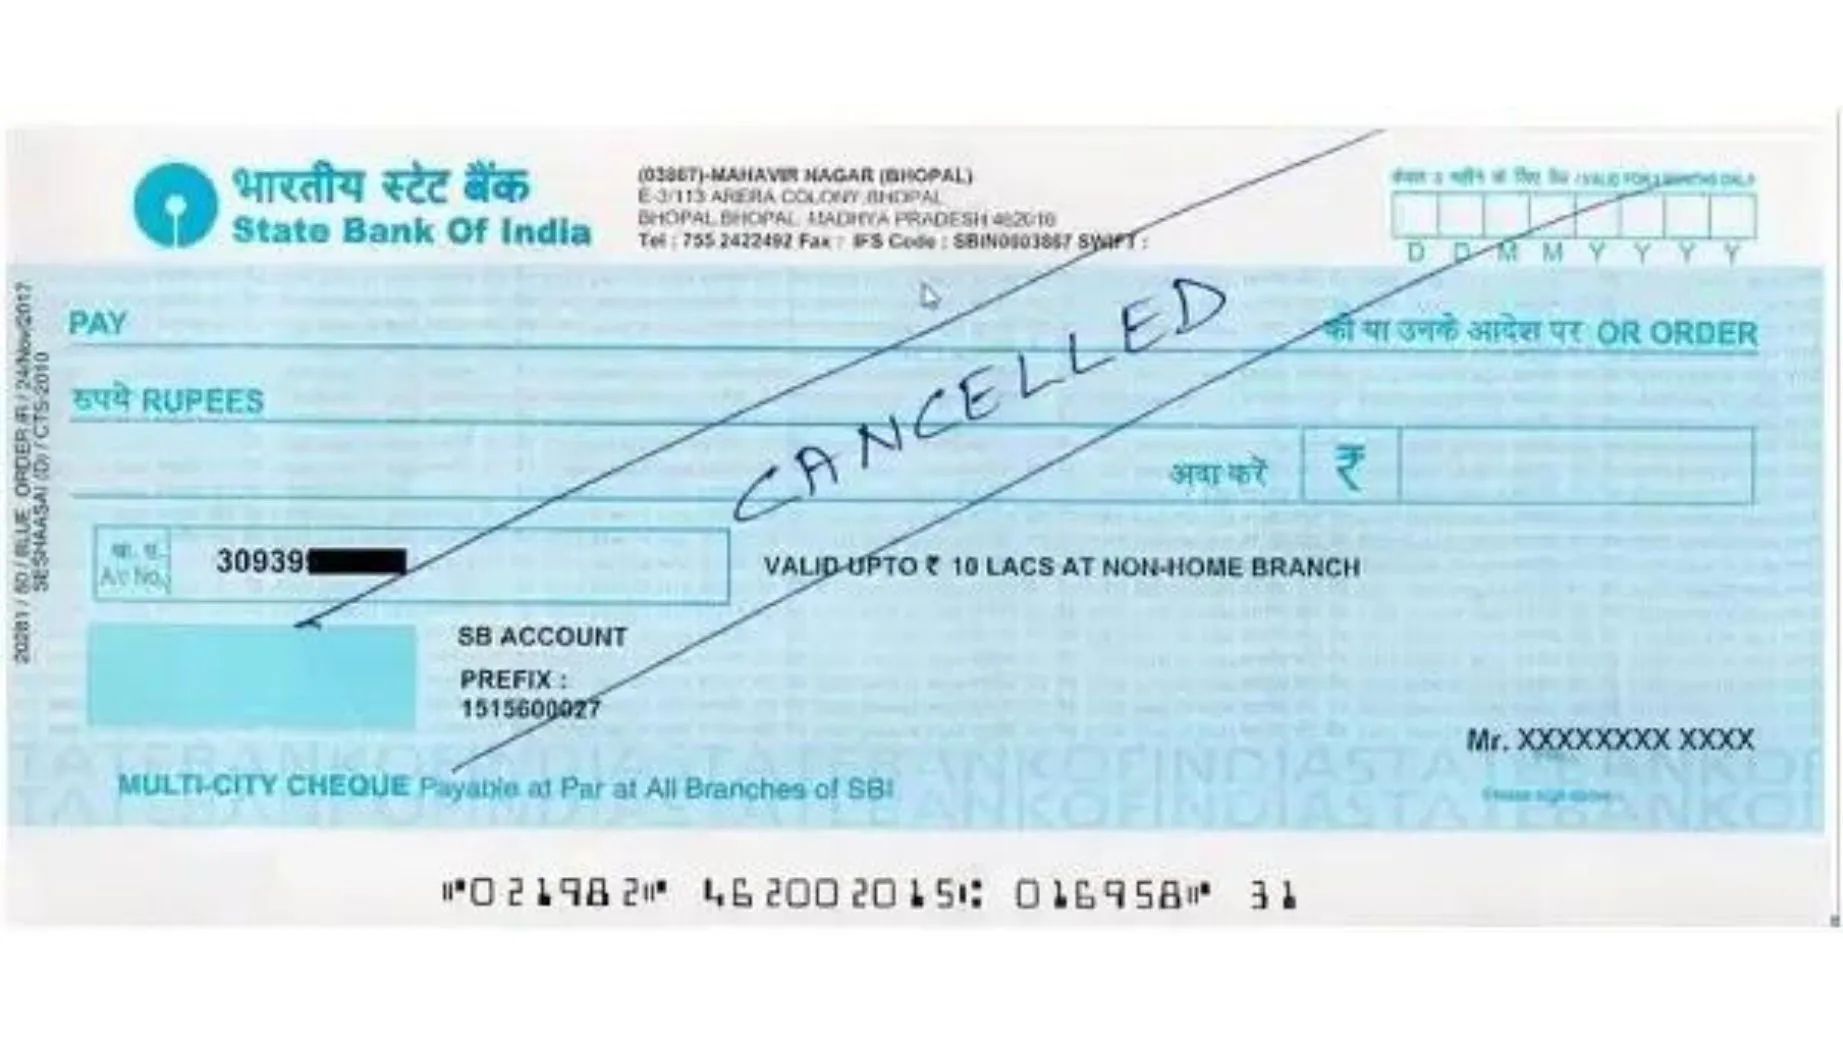 Cancelled cheque images